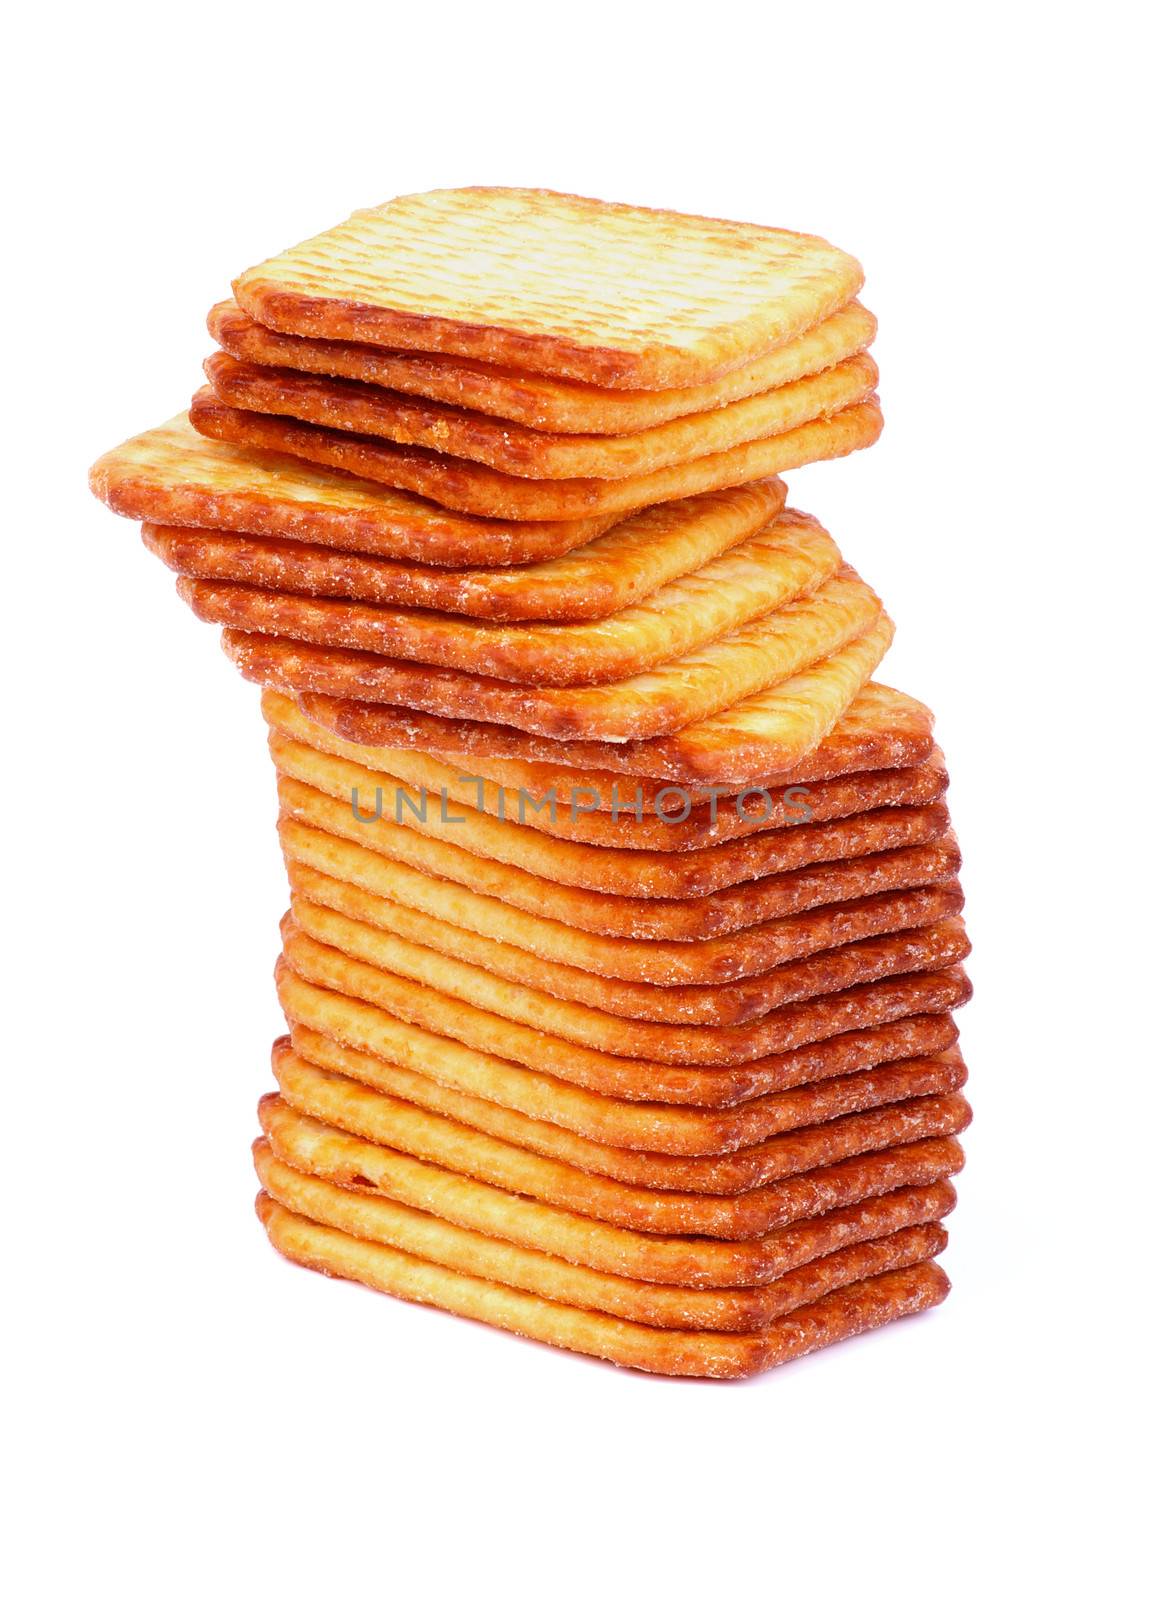 Stack of Crackers by zhekos